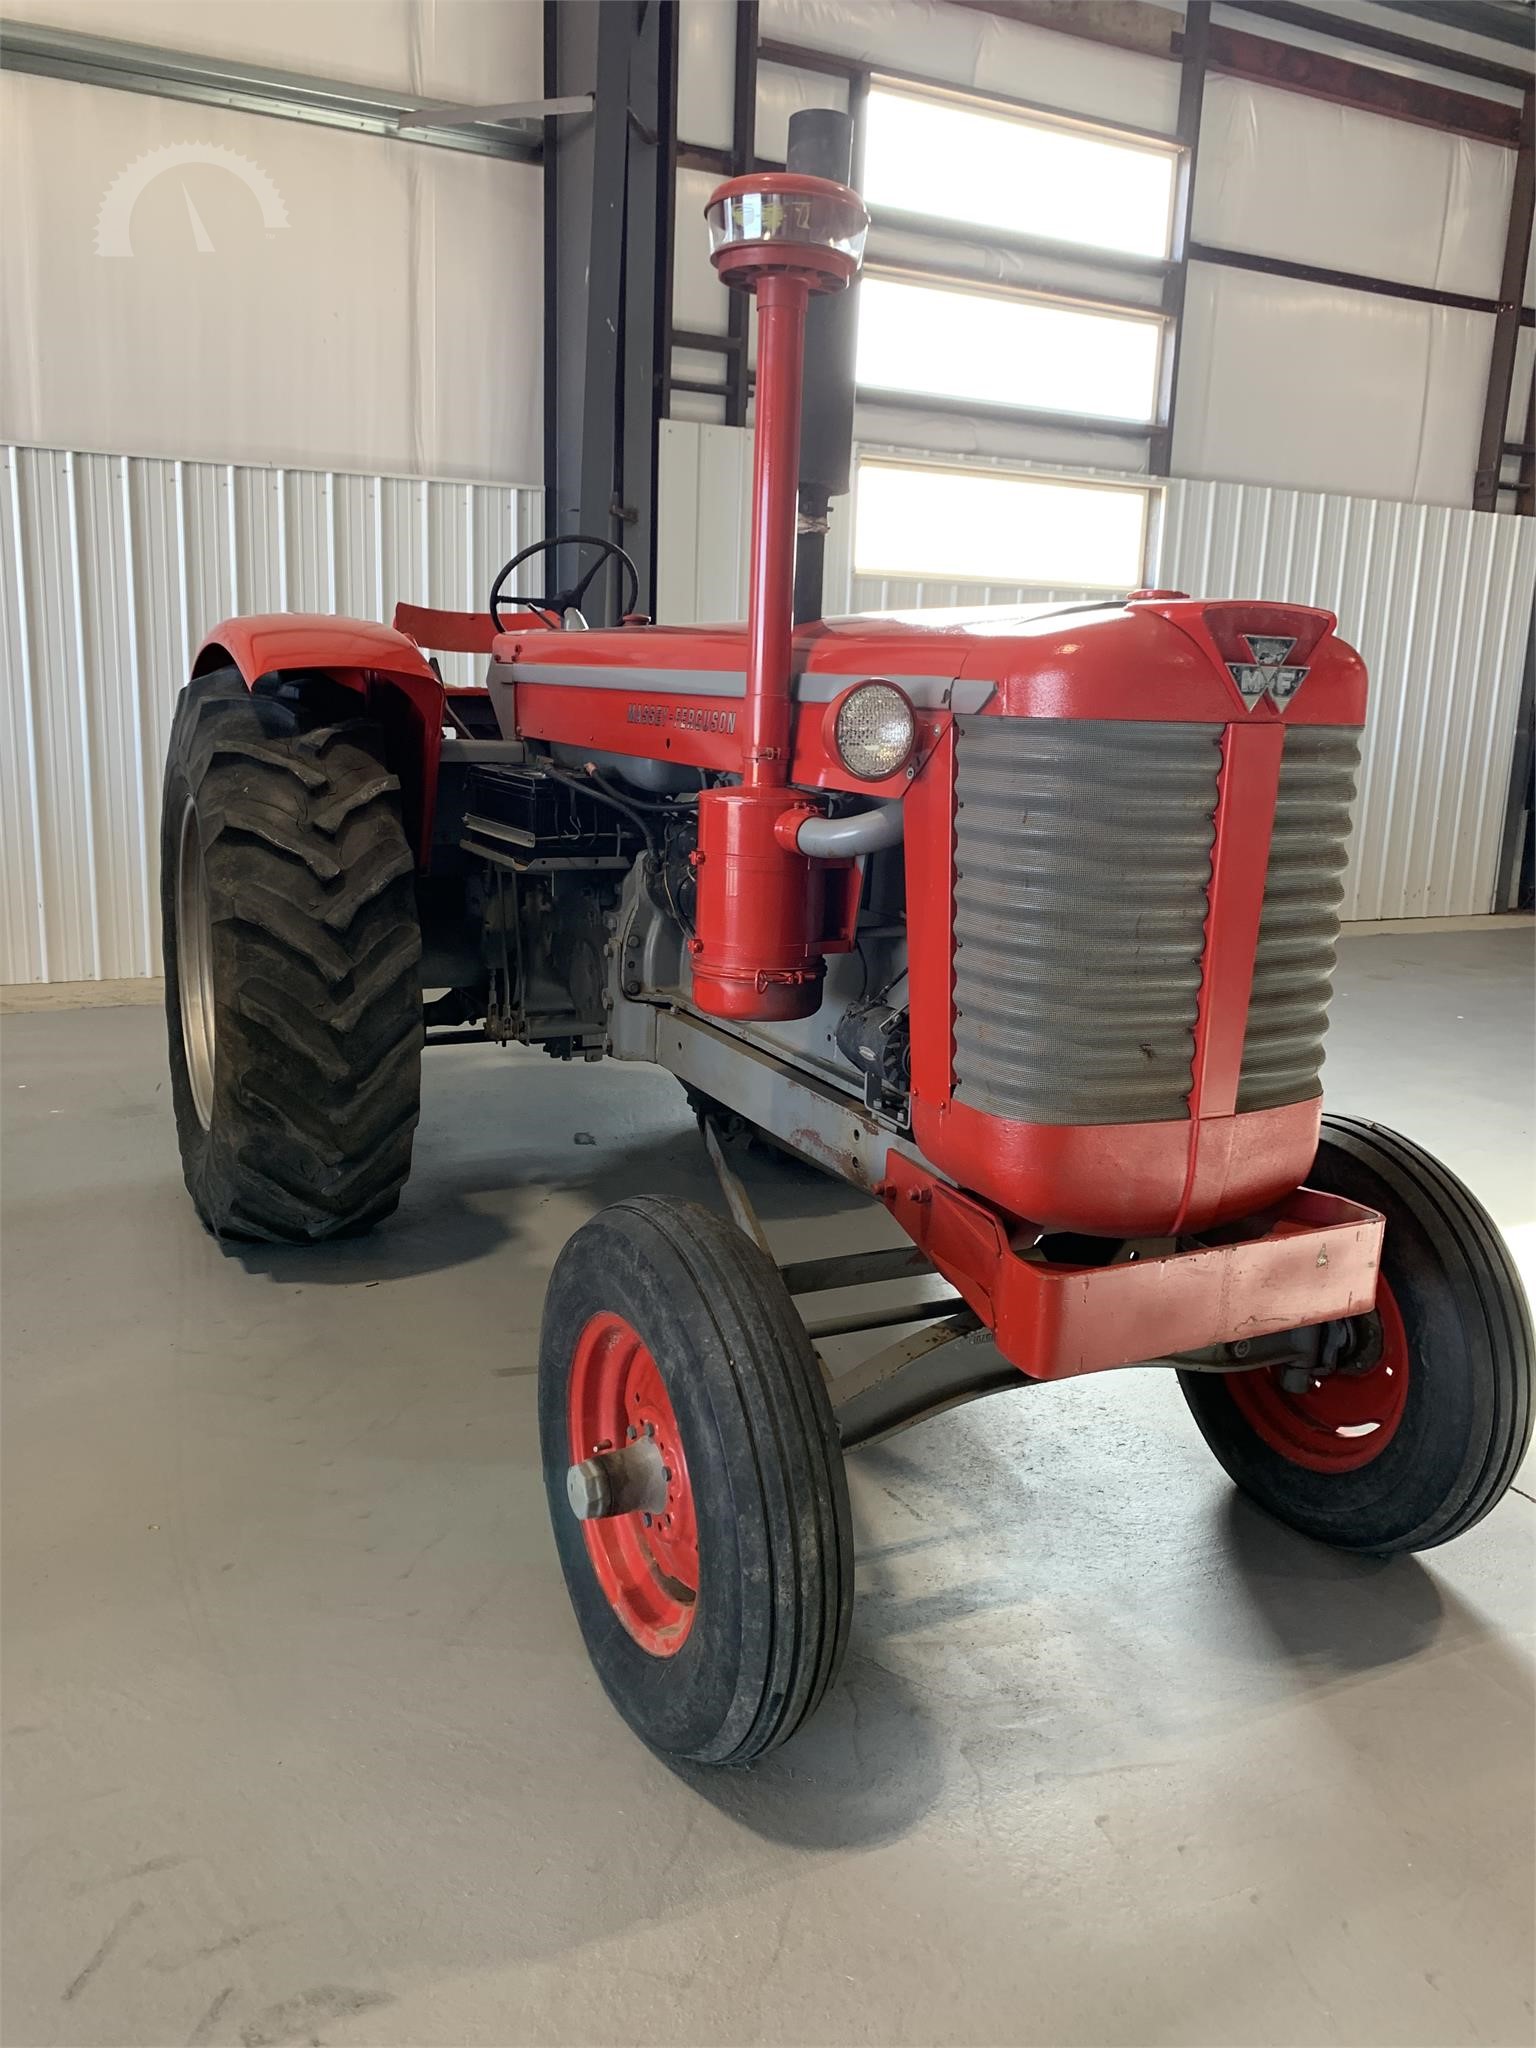 Massey Ferguson 100 Hp To 174 Hp Tractors Auction Results 162 Listings Auctiontime Com Page 1 Of 7